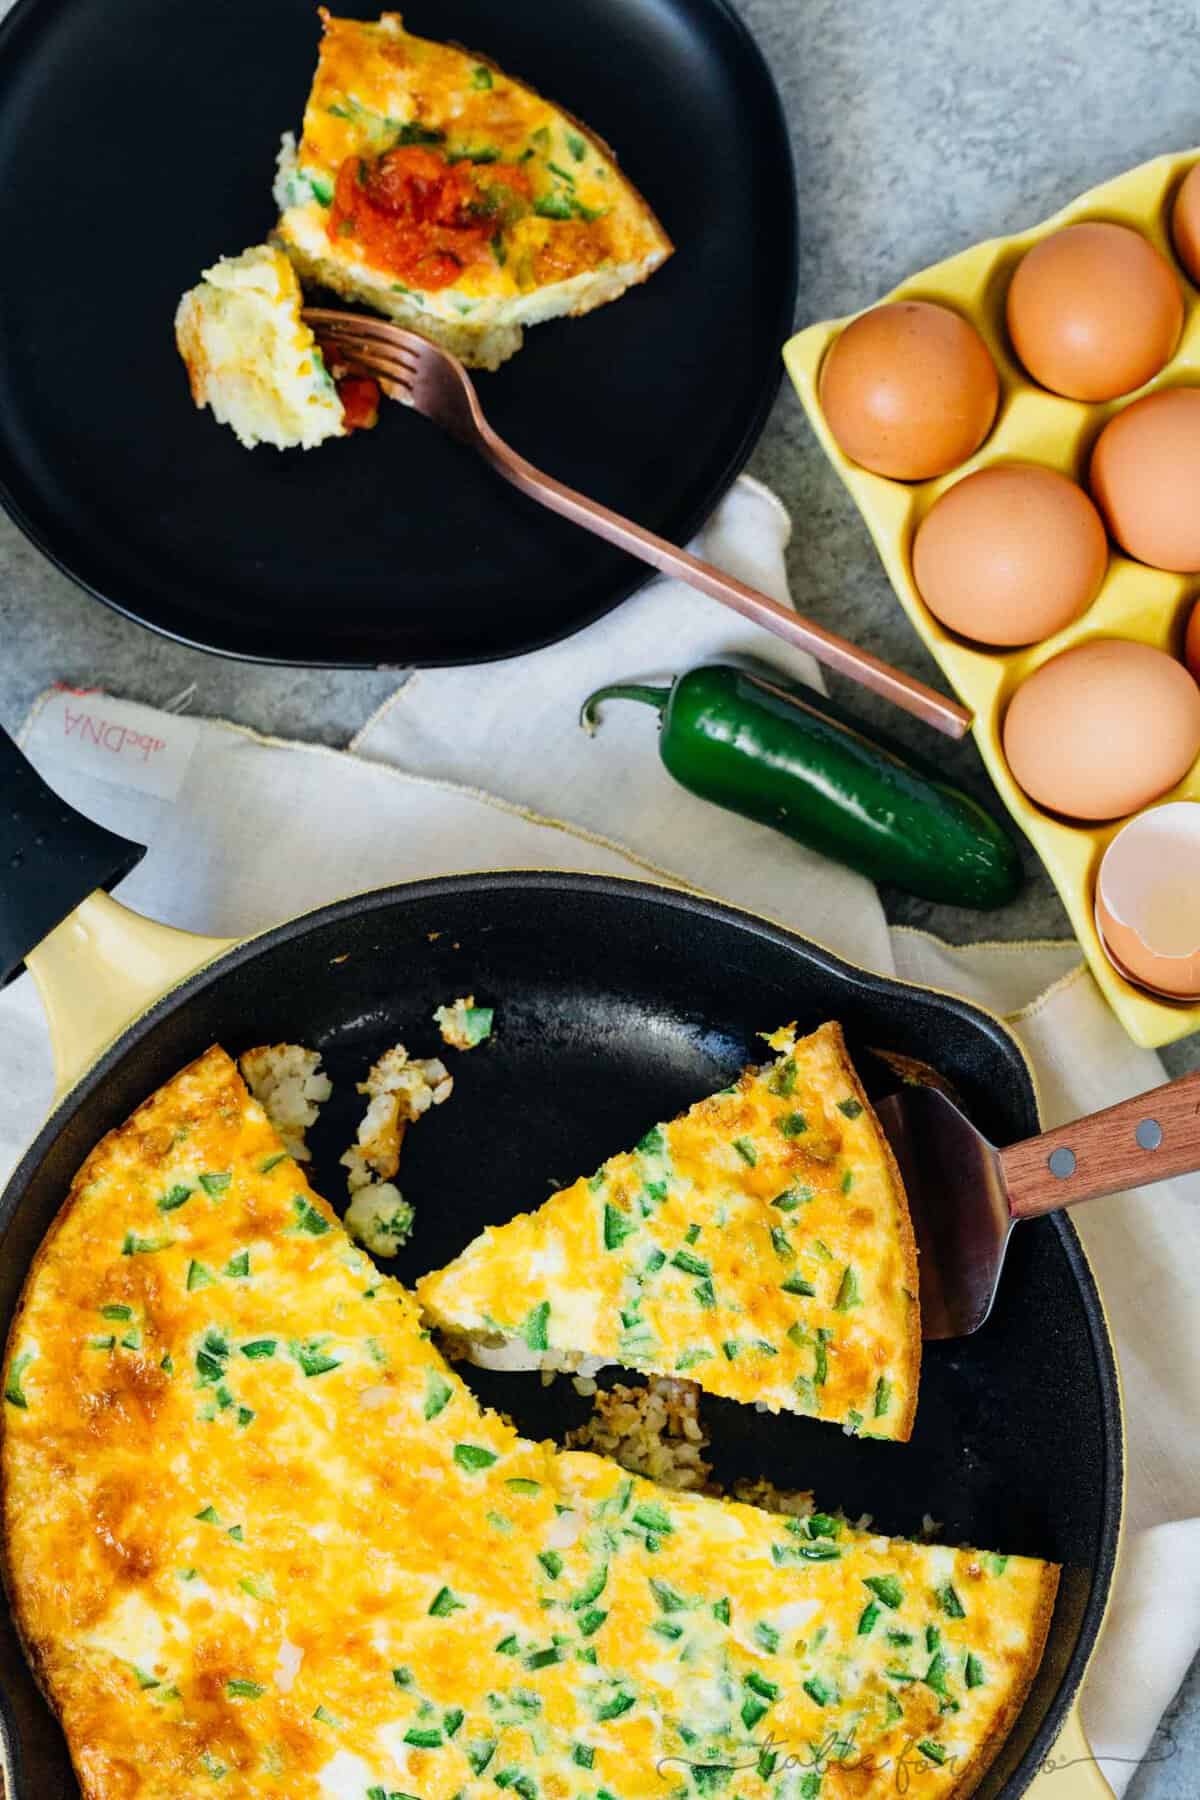 This cheddar jalapeno tater tot frittata has everything you want in one dish! Your entire breakfast is cooked in one skillet and the tater tot crust is crispy and THE BEST PART of this frittata!